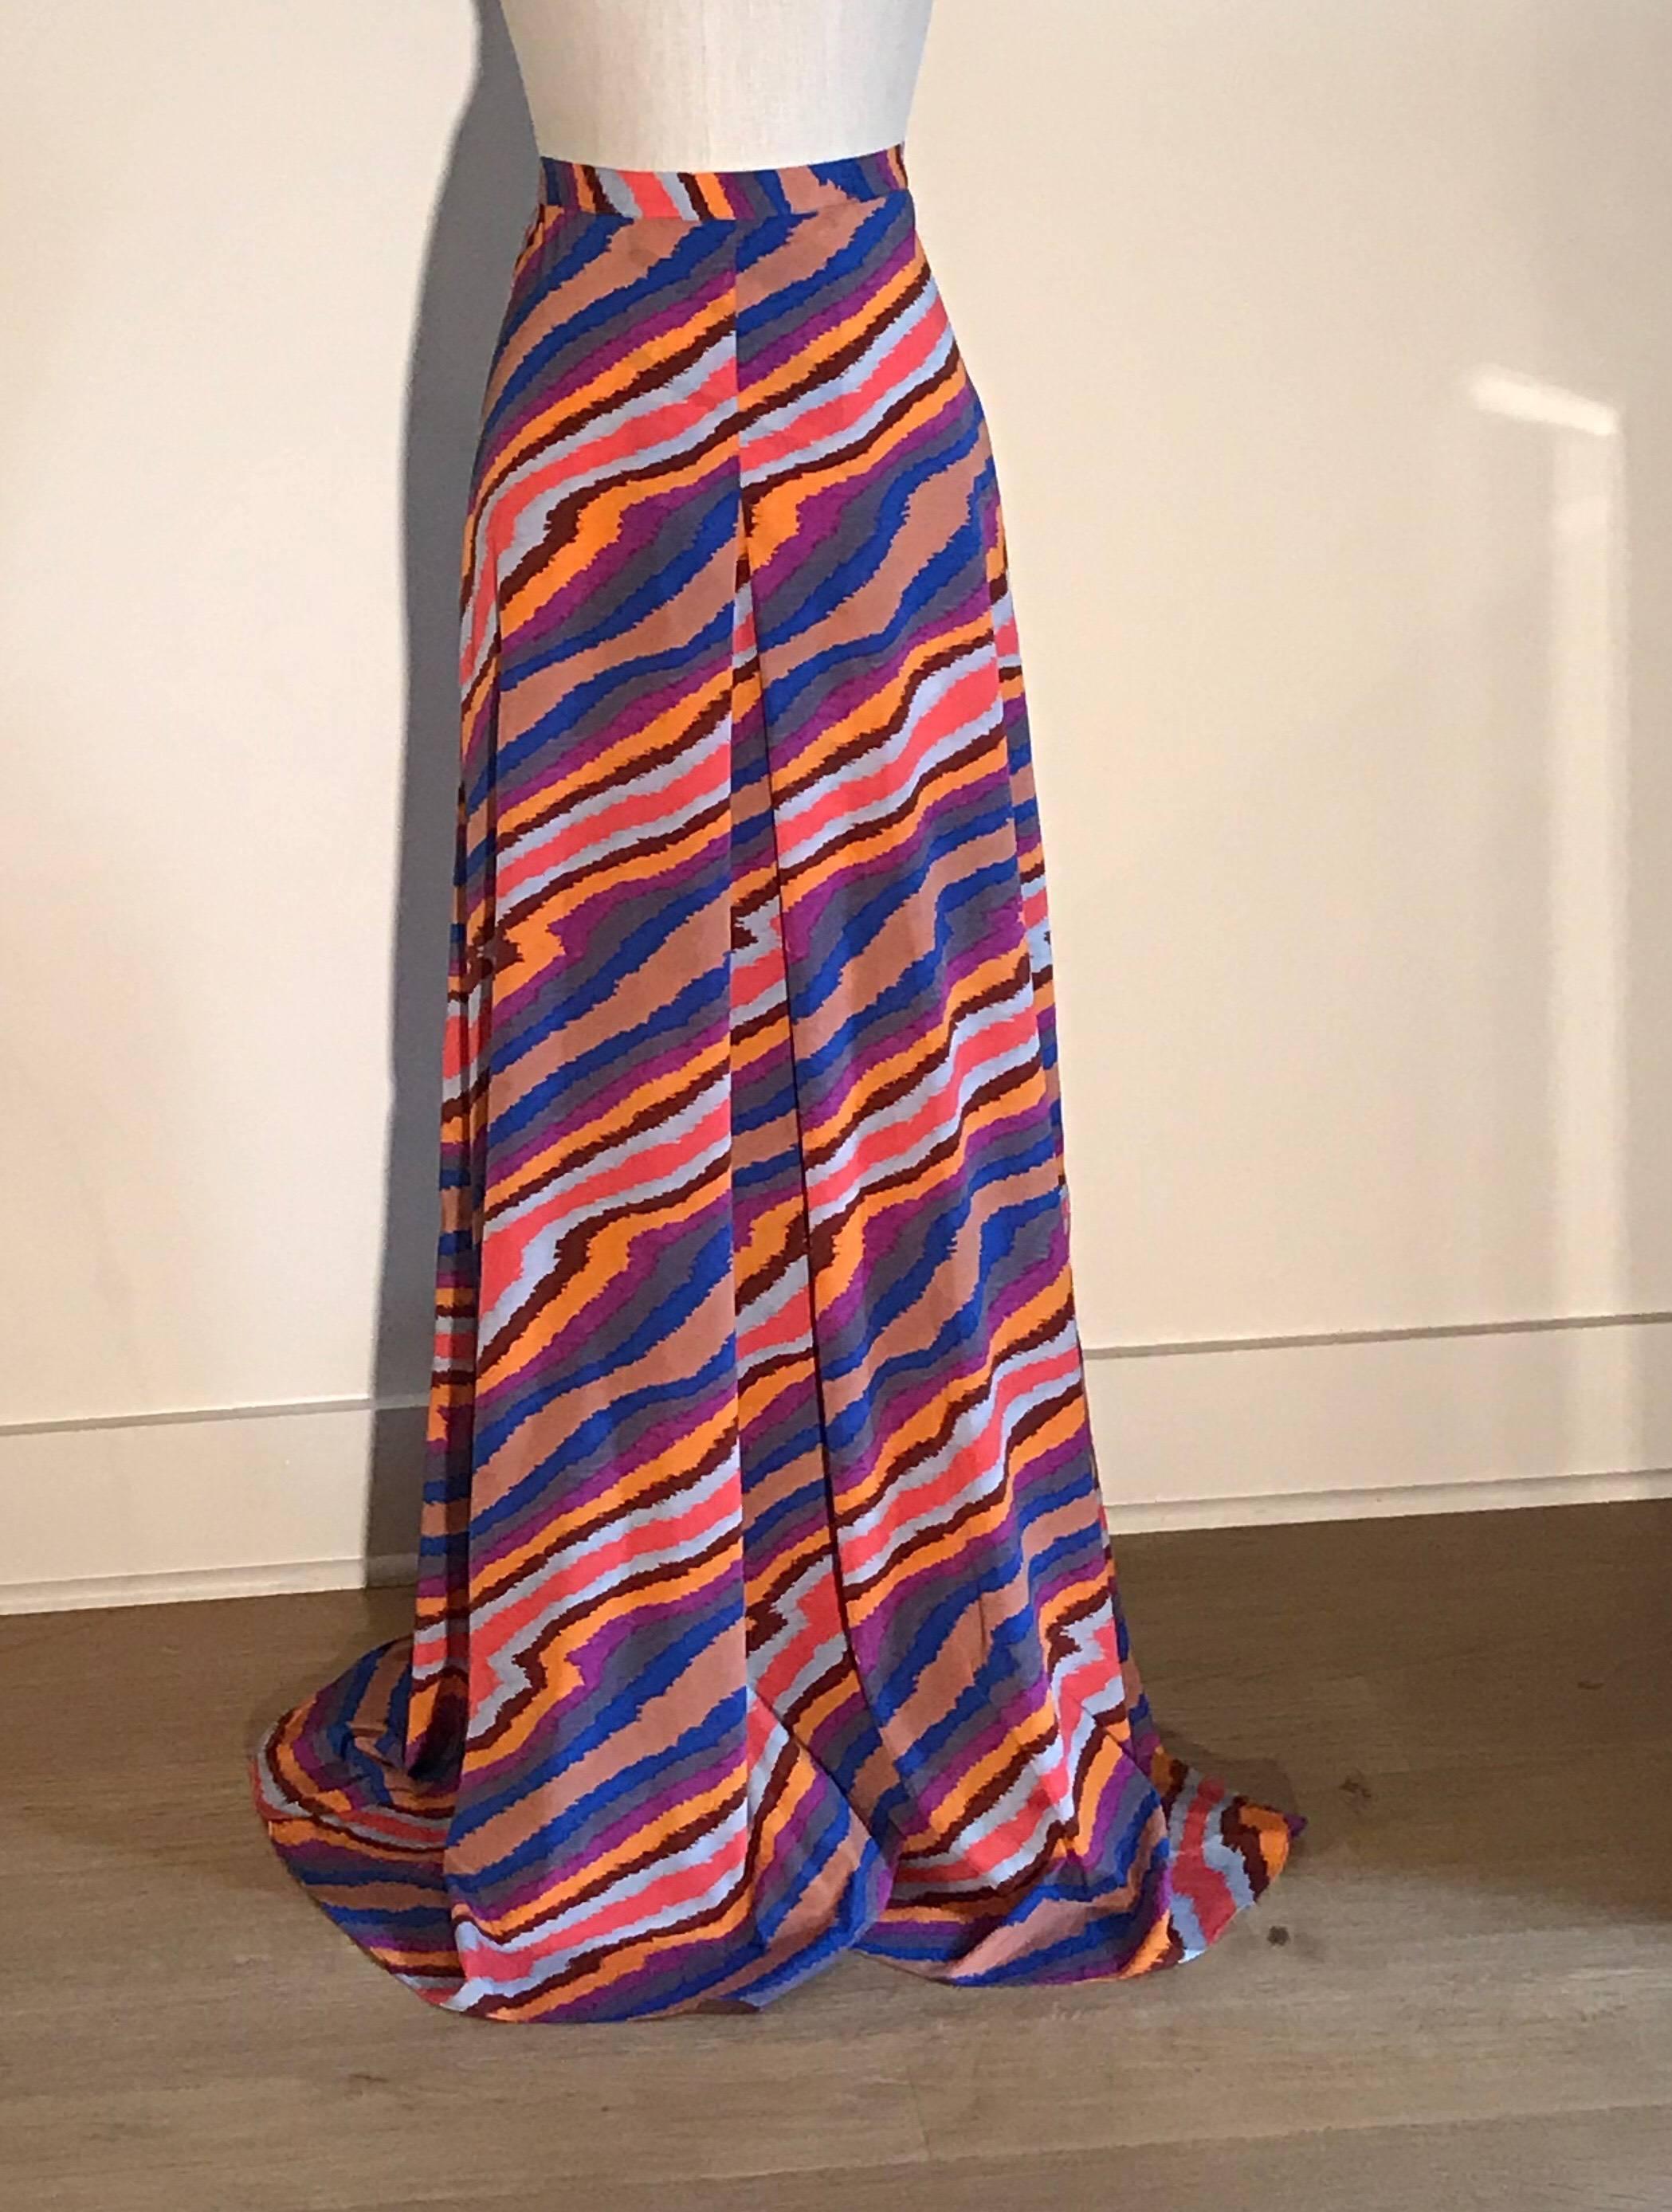 Missoni lightweight maxi skirt in a painterly stripe pattern in shades of sand, orange, maroon, fuchsia, grey, and blue. Side zip with two snaps at waist band.

96% silk, 4% elastane. Unlined.

Made in Italy.

Size IT 40, approximate US 4. See